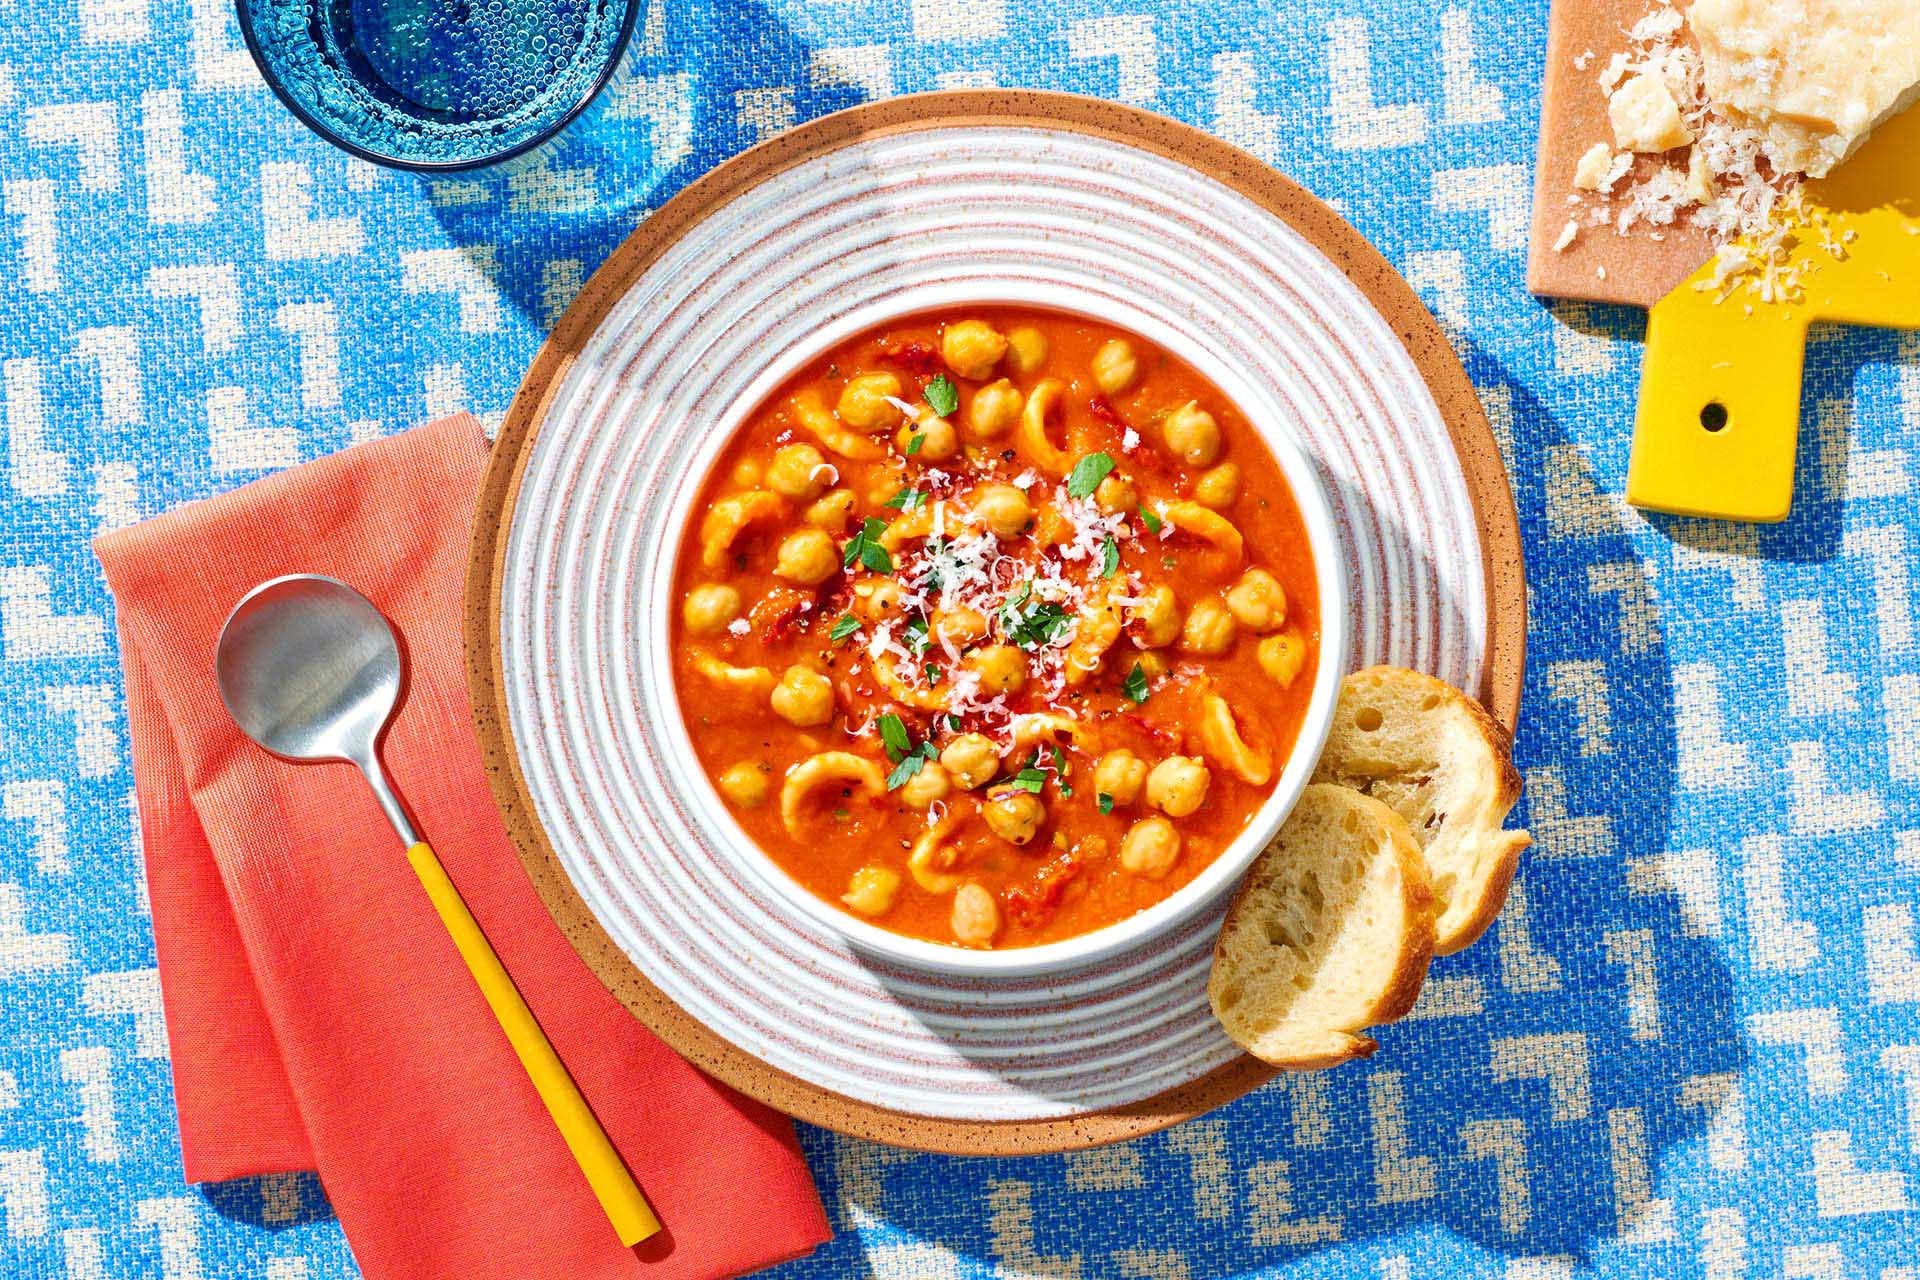 A bowl of Tuscan garbanzo bean and sun dried tomato soup with toast rounds on a plate